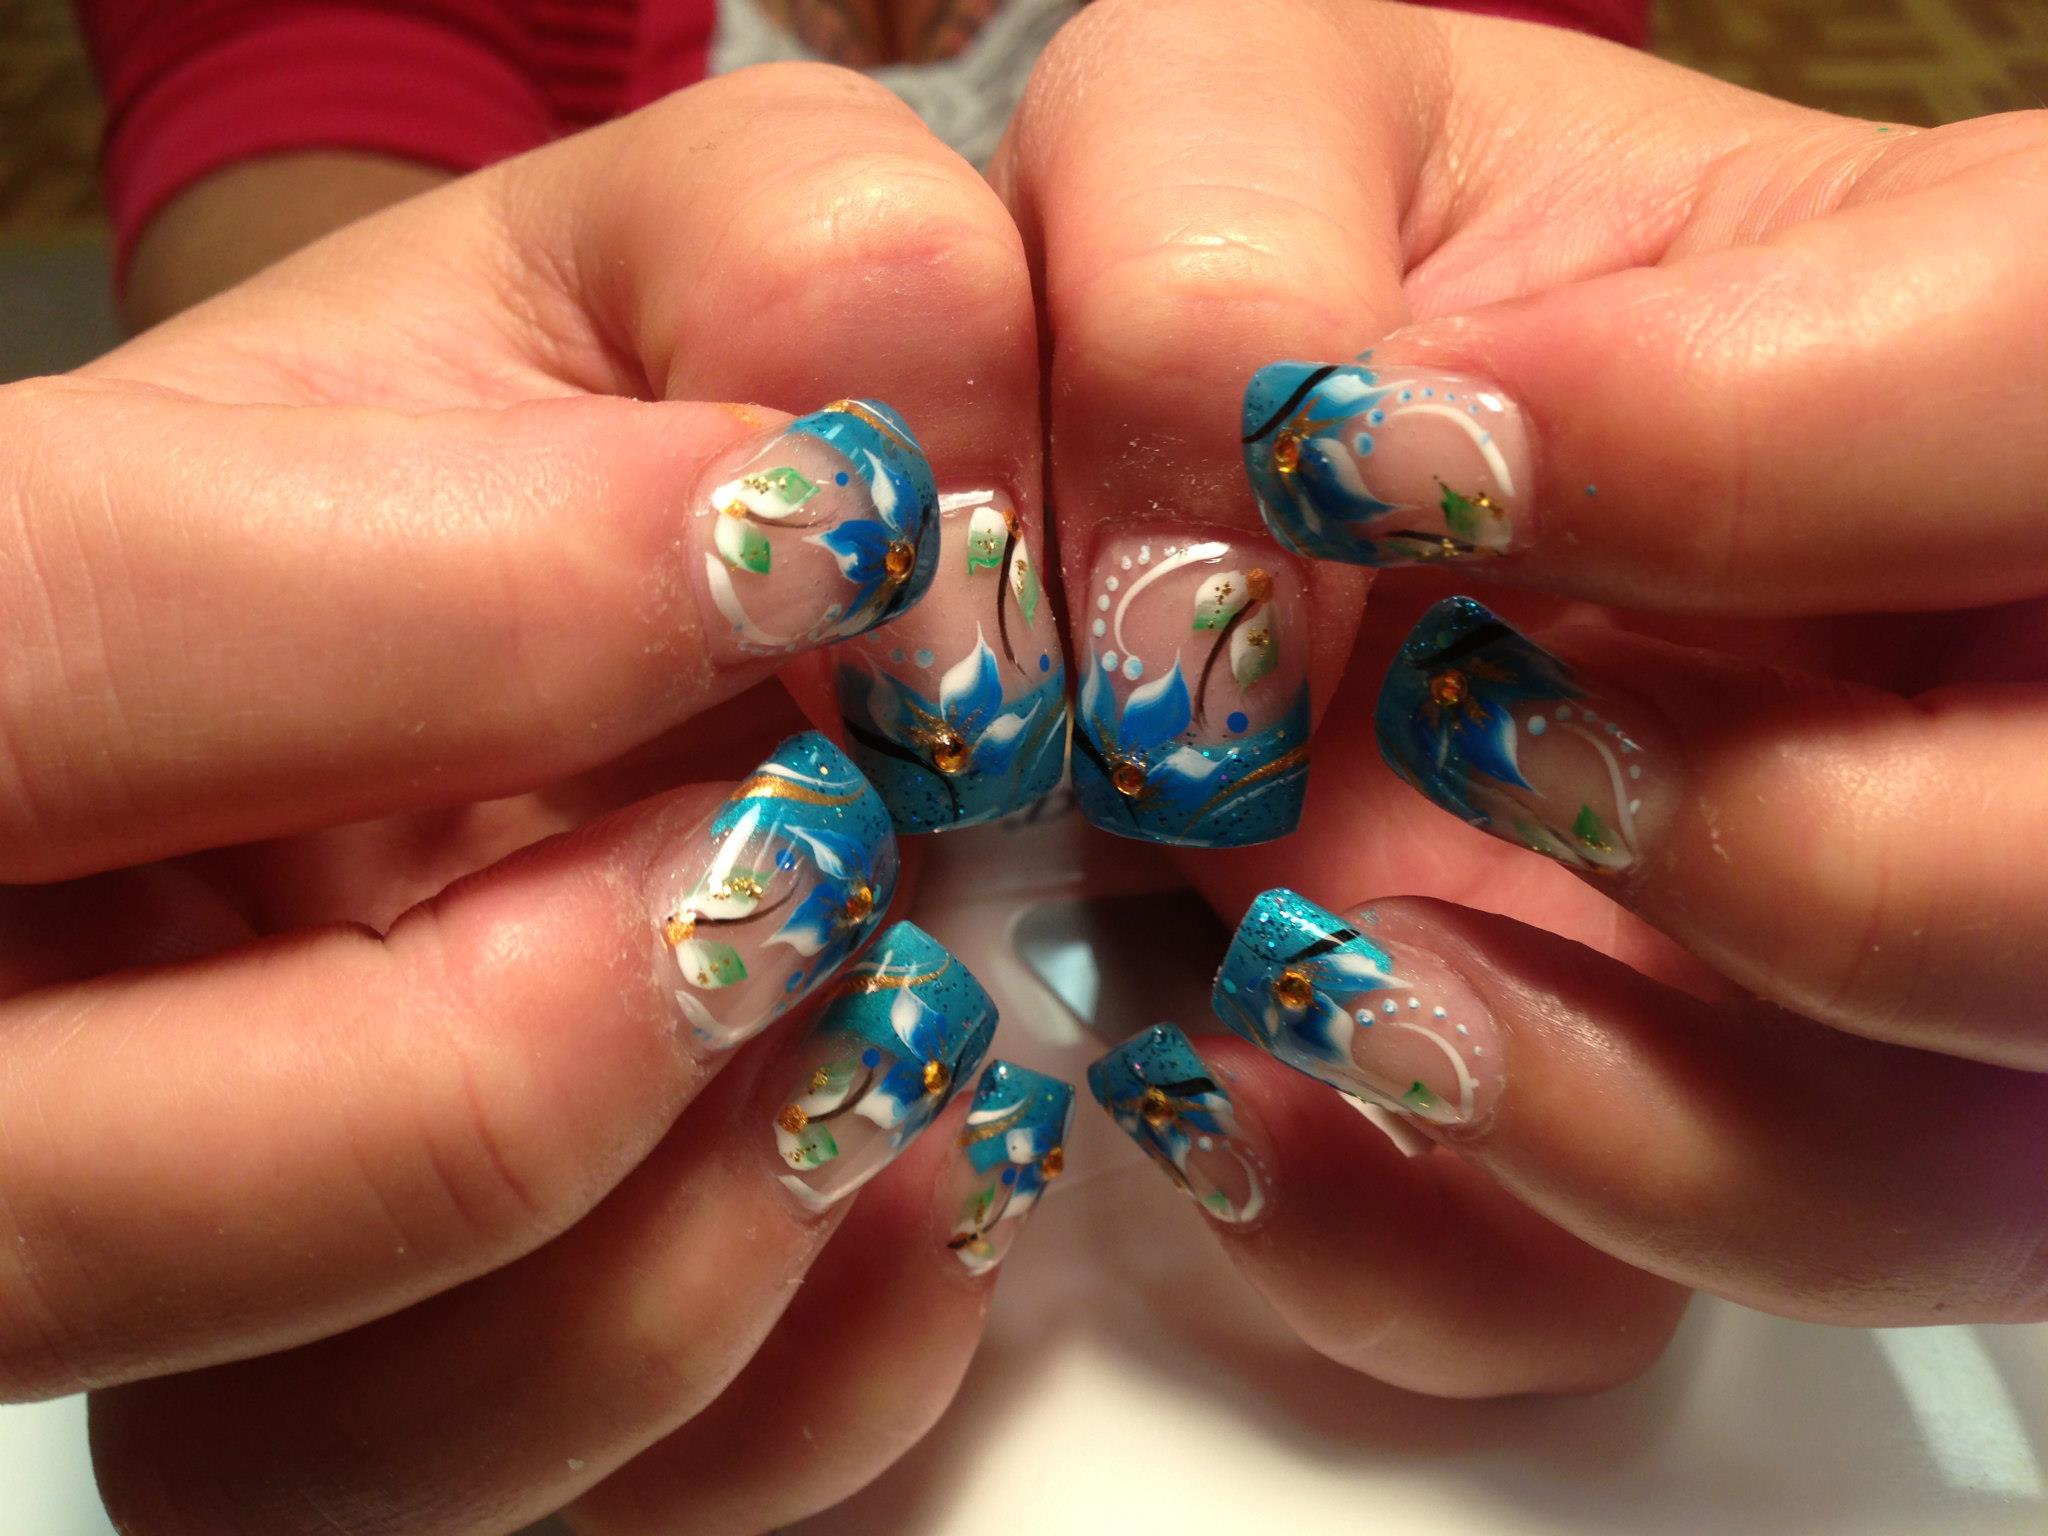 Clear Base Nail Art Designs - wide 5